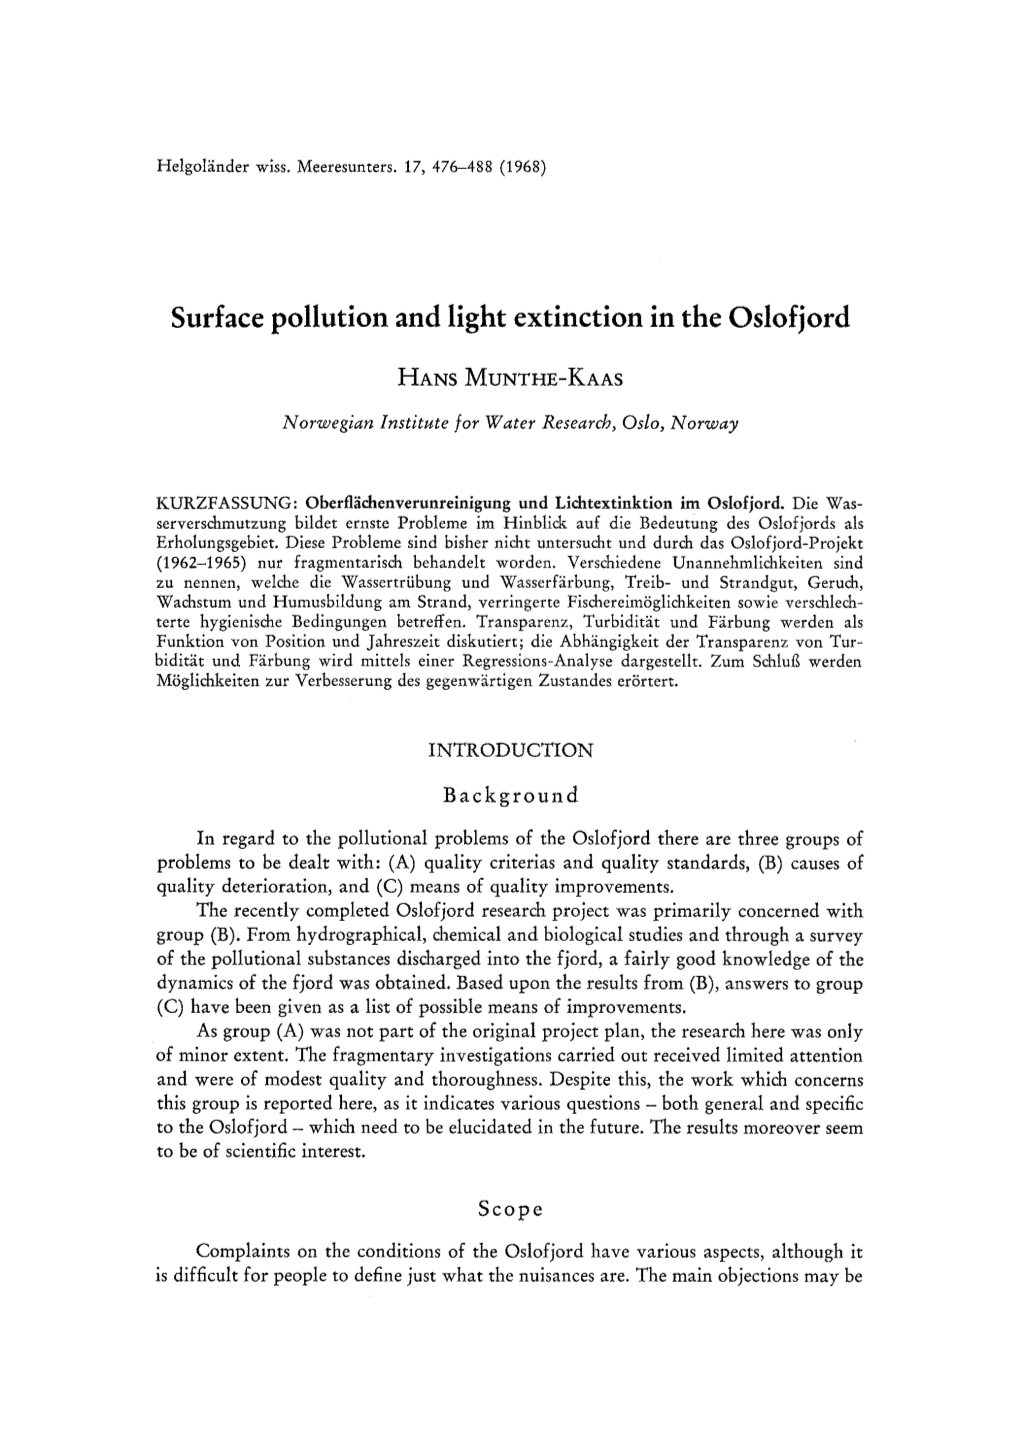 Surface Pollution and Light Extinction in the Oslofjord